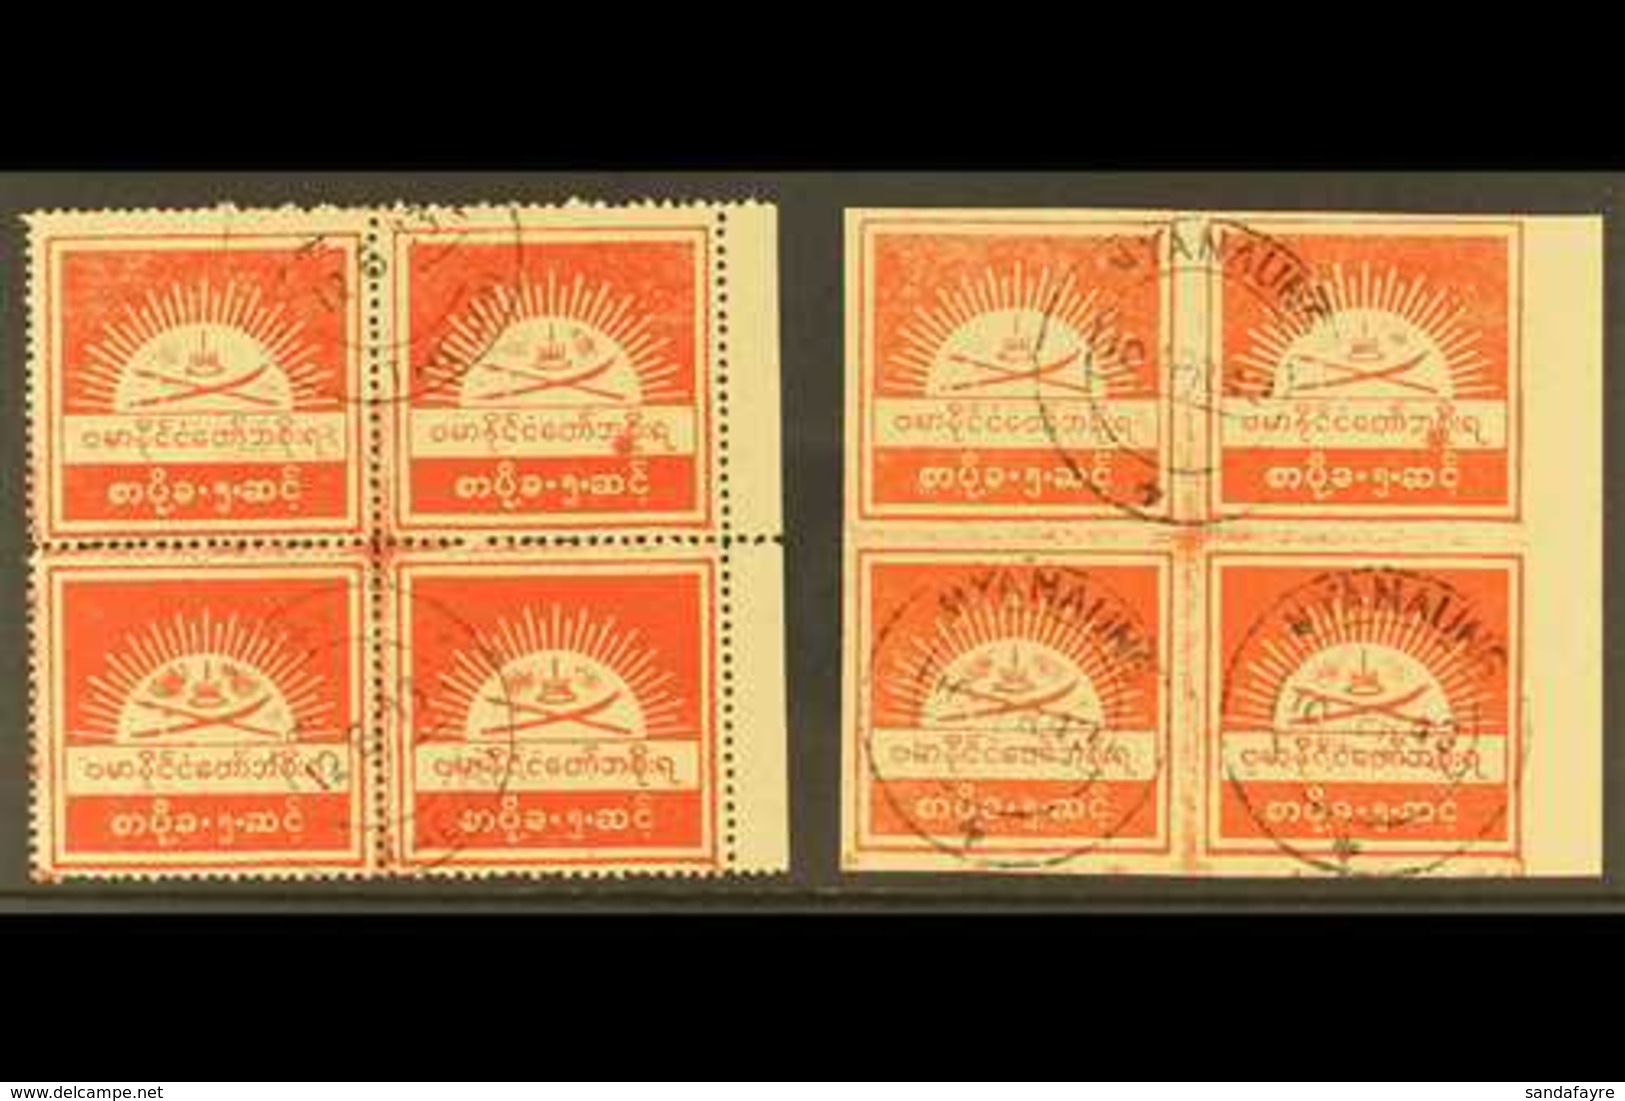 1943 (Feb) 5c Scarlet Burma State Crest Matching PERF & IMPERF. BLOCKS OF FOUR, SG J72/72a, Used. Some Perfs Separating. - Birmania (...-1947)